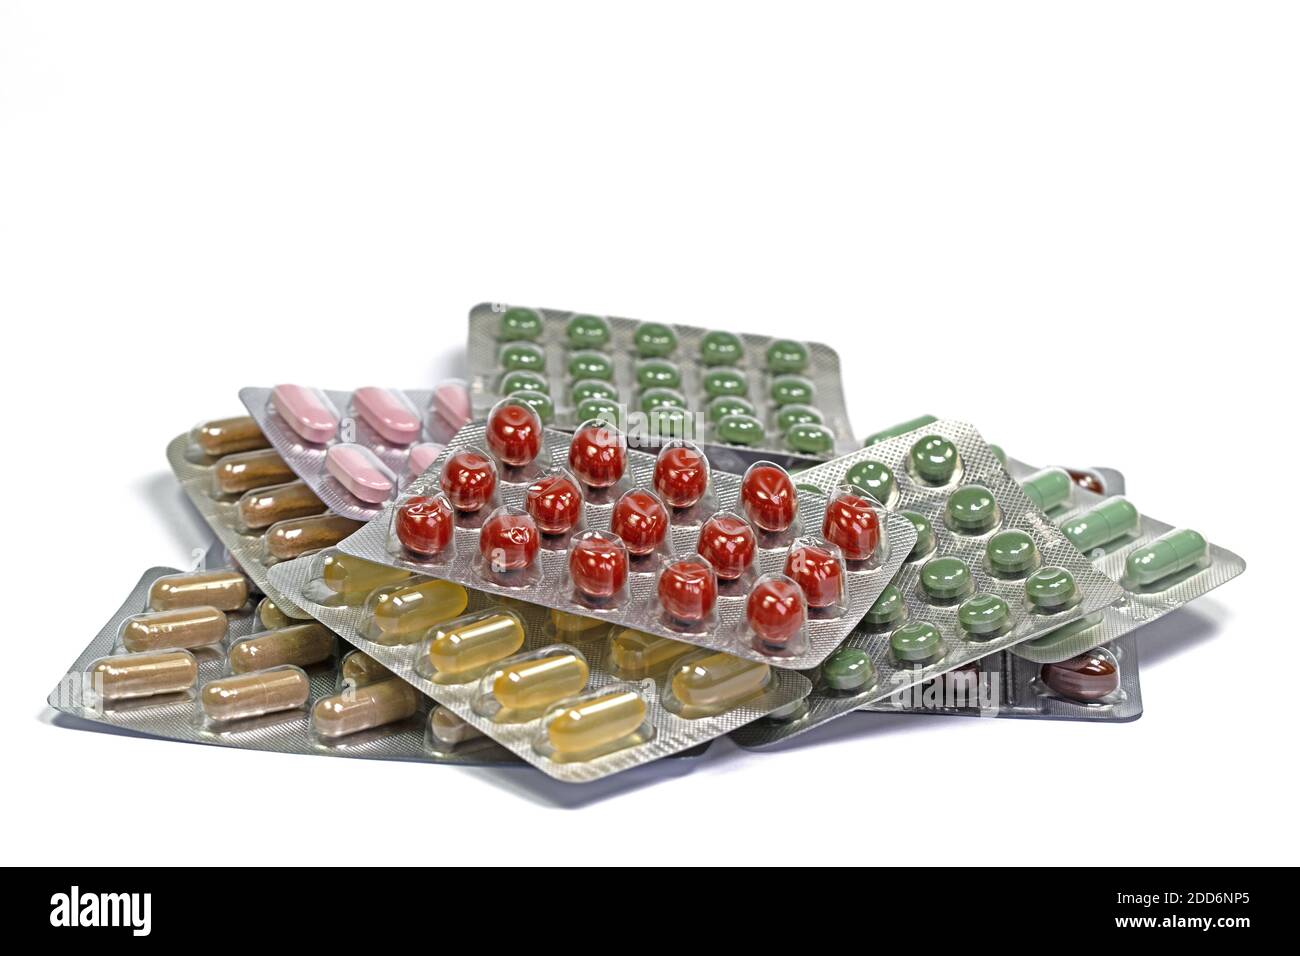 Many tablets, medicines isolated against white background Stock Photo